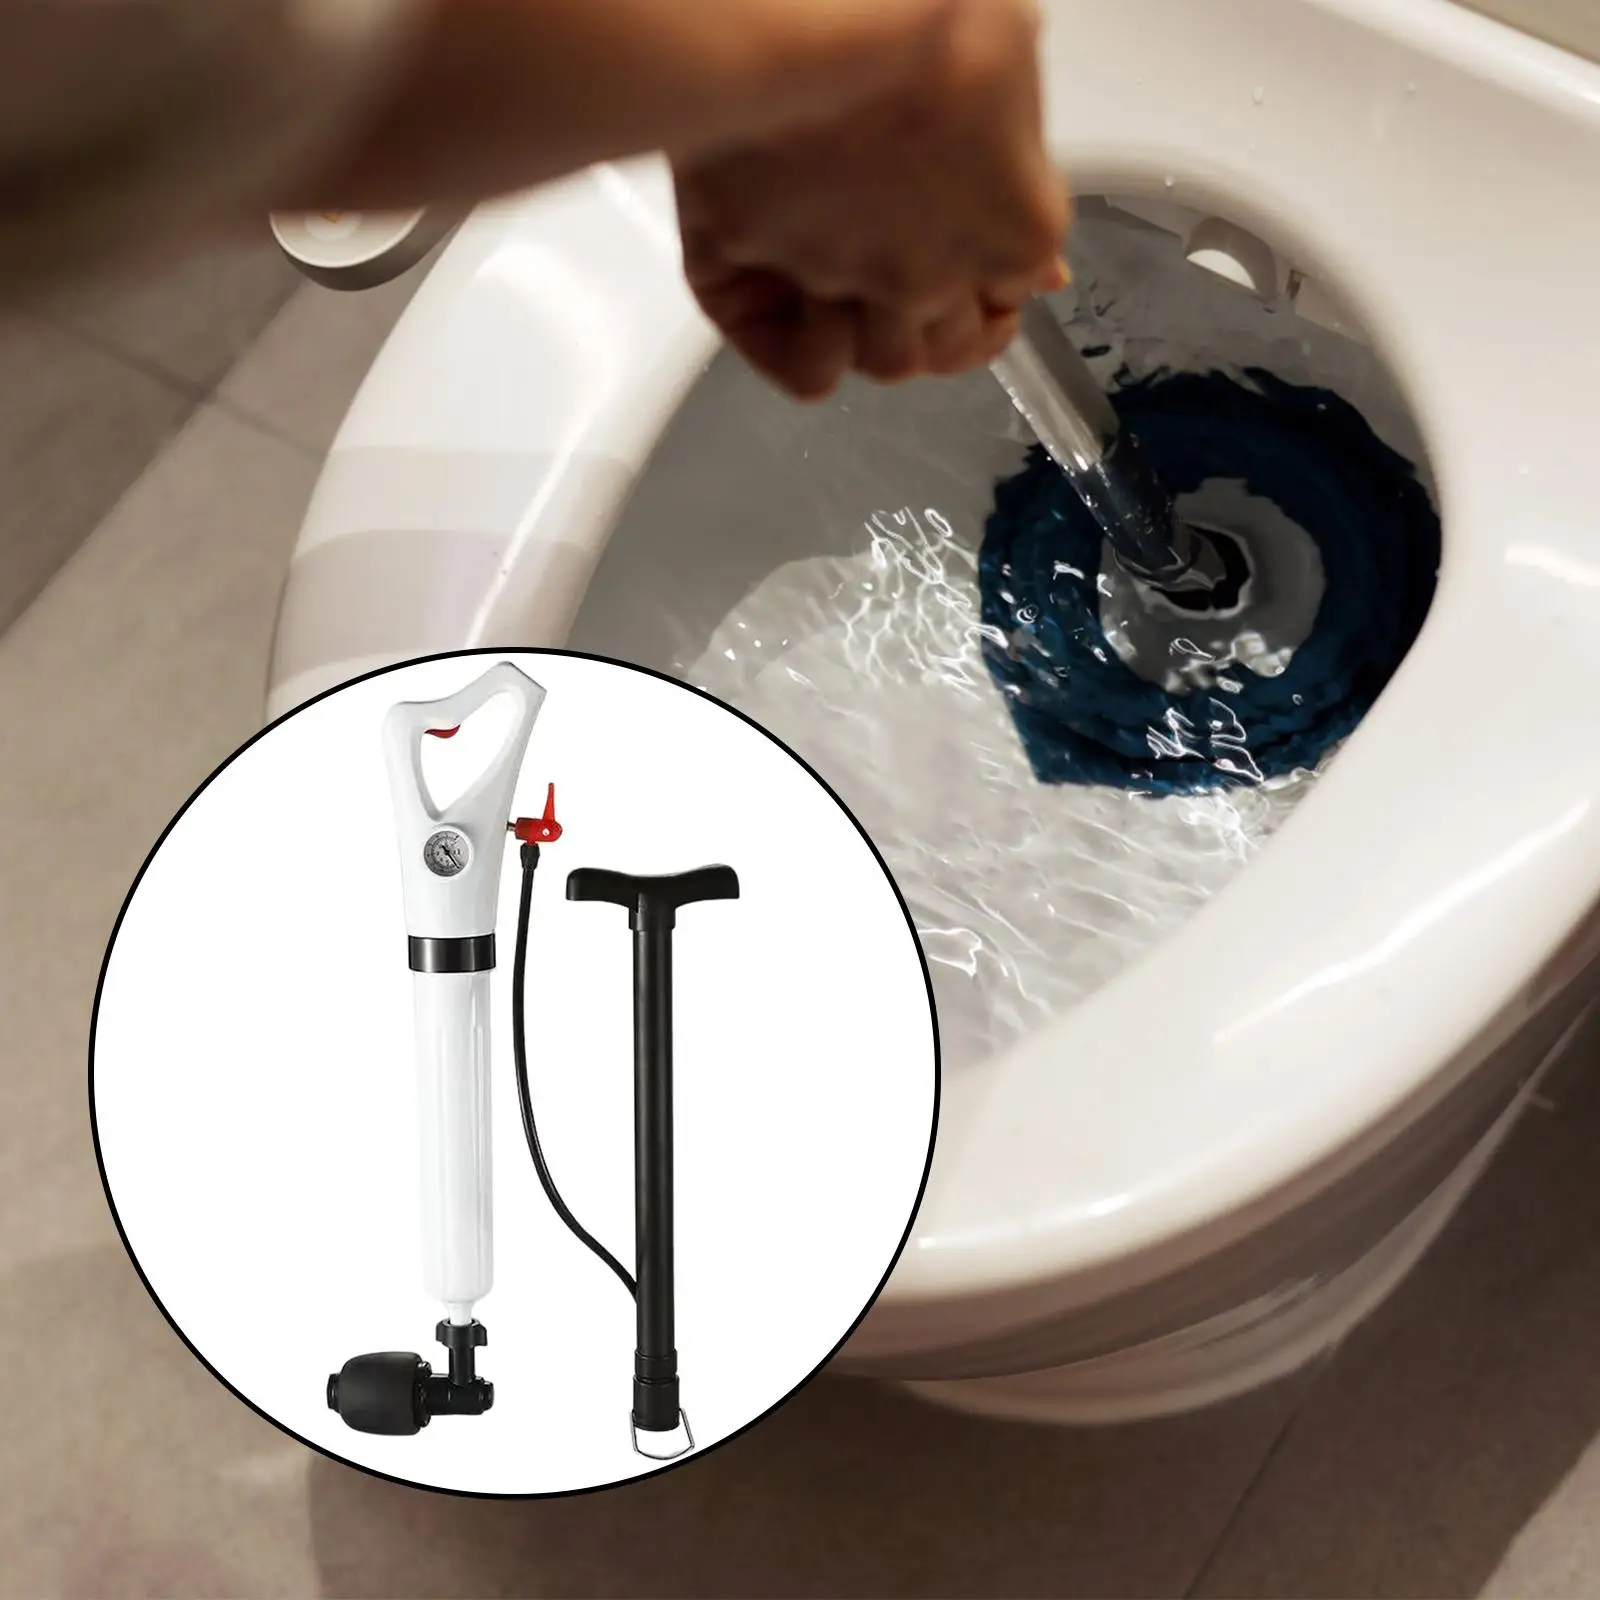 Toilet Plunger set Air drain Clog Remover Replaceable Heads Sewer Dredge Tool for Hotel